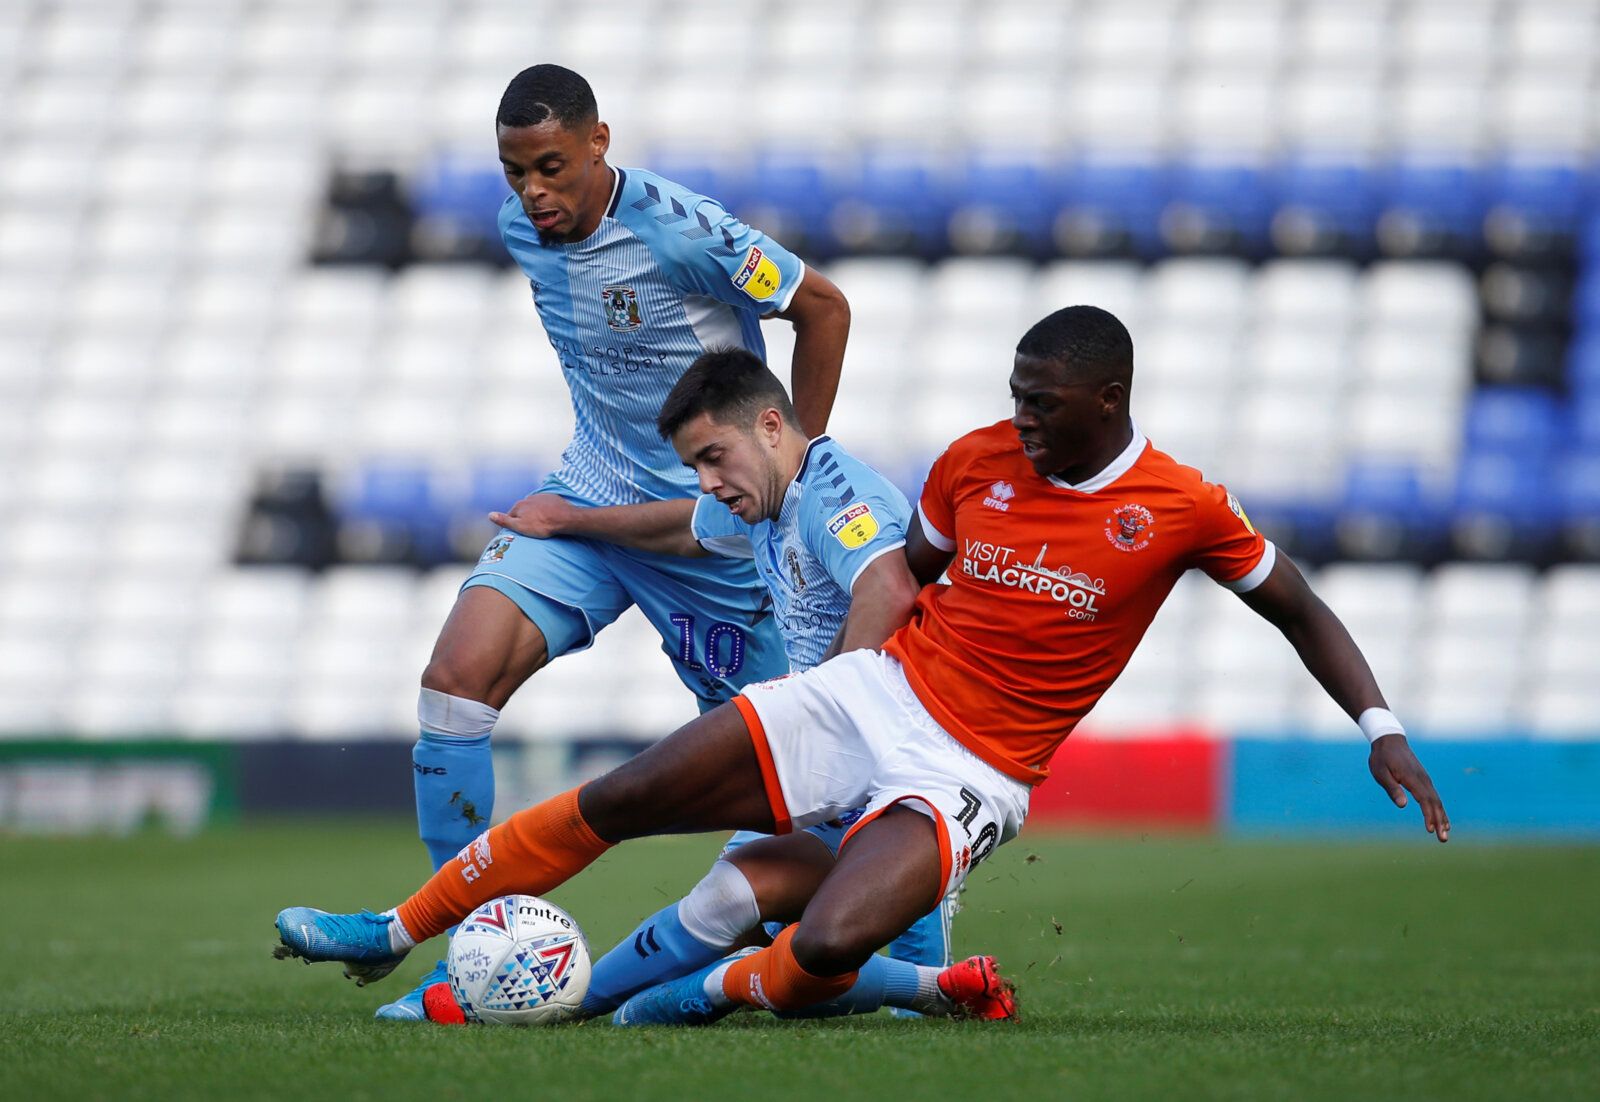 Soccer Football - League One - Coventry City v Blackpool - St Andrew's, Birmingham, Britain - September 7, 2019  Blackpool's Sullay Kaikai in action with Coventry City's Wesley Jobello and Liam Walsh   Action Images/Ed Sykes  EDITORIAL USE ONLY. No use with unauthorized audio, video, data, fixture lists, club/league logos or "live" services. Online in-match use limited to 75 images, no video emulation. No use in betting, games or single club/league/player publications.  Please contact your accou